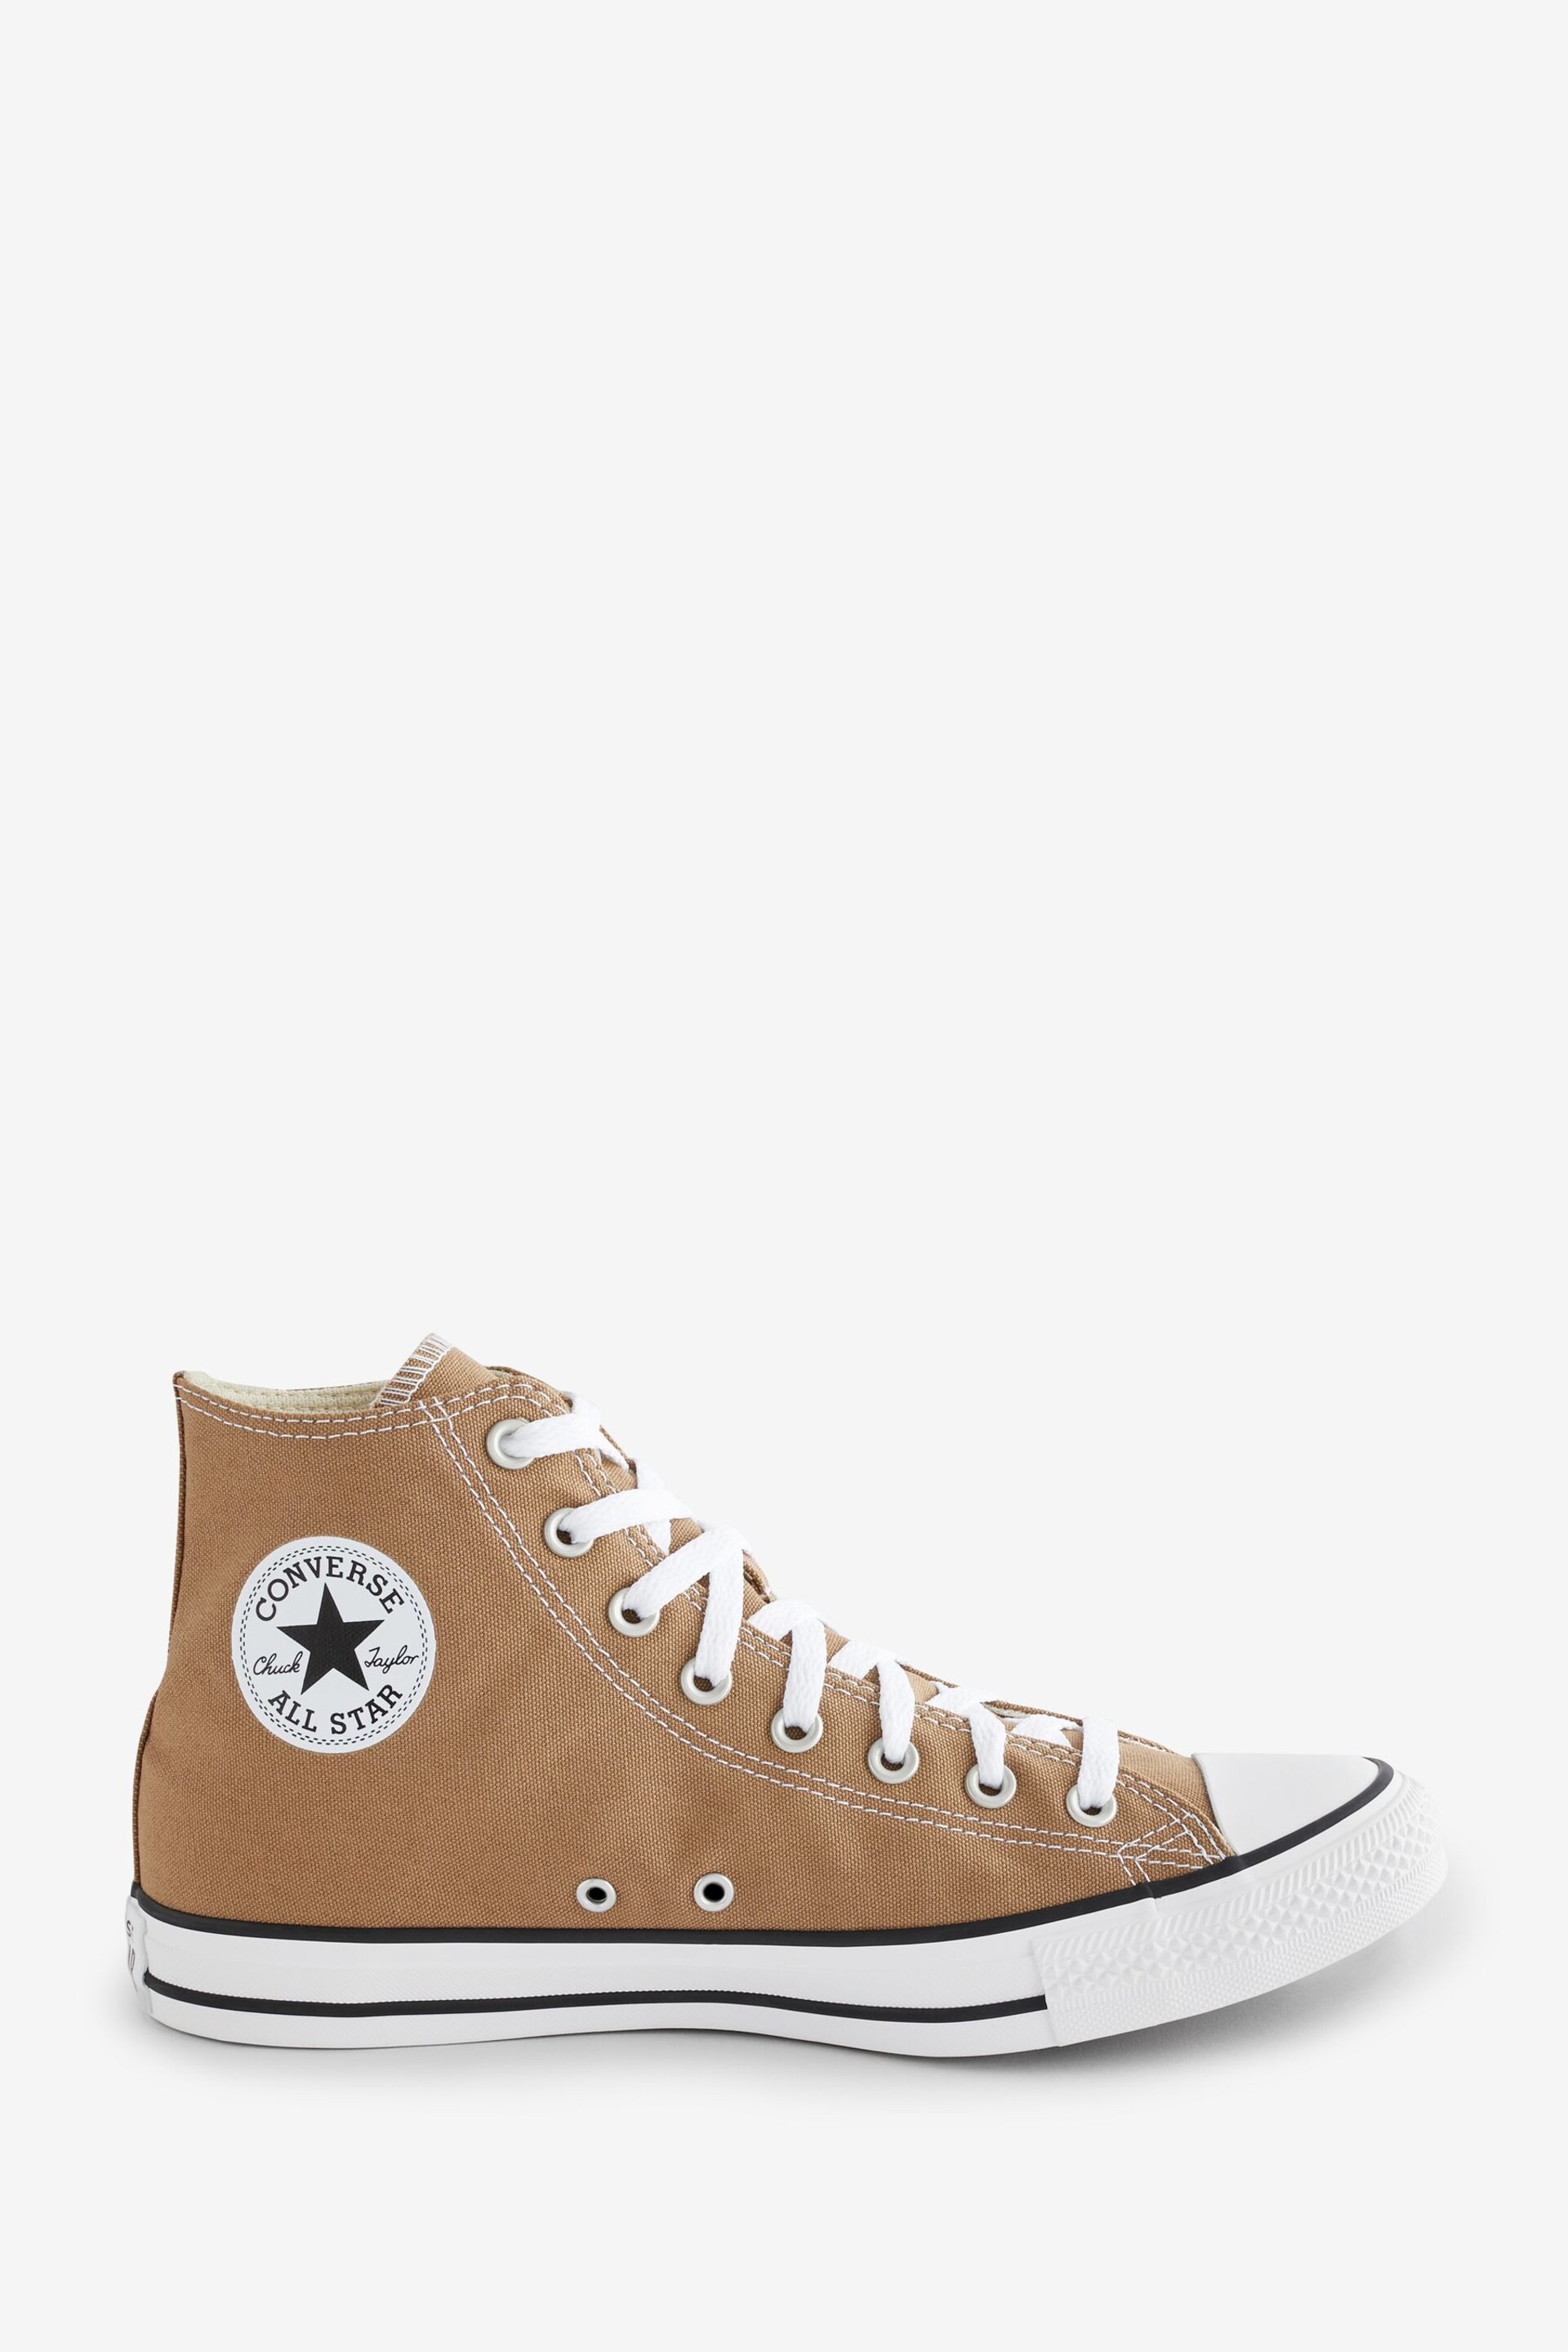 Converse Brown Chuck Taylor Classic High Top Trainers - Image 1 of 9